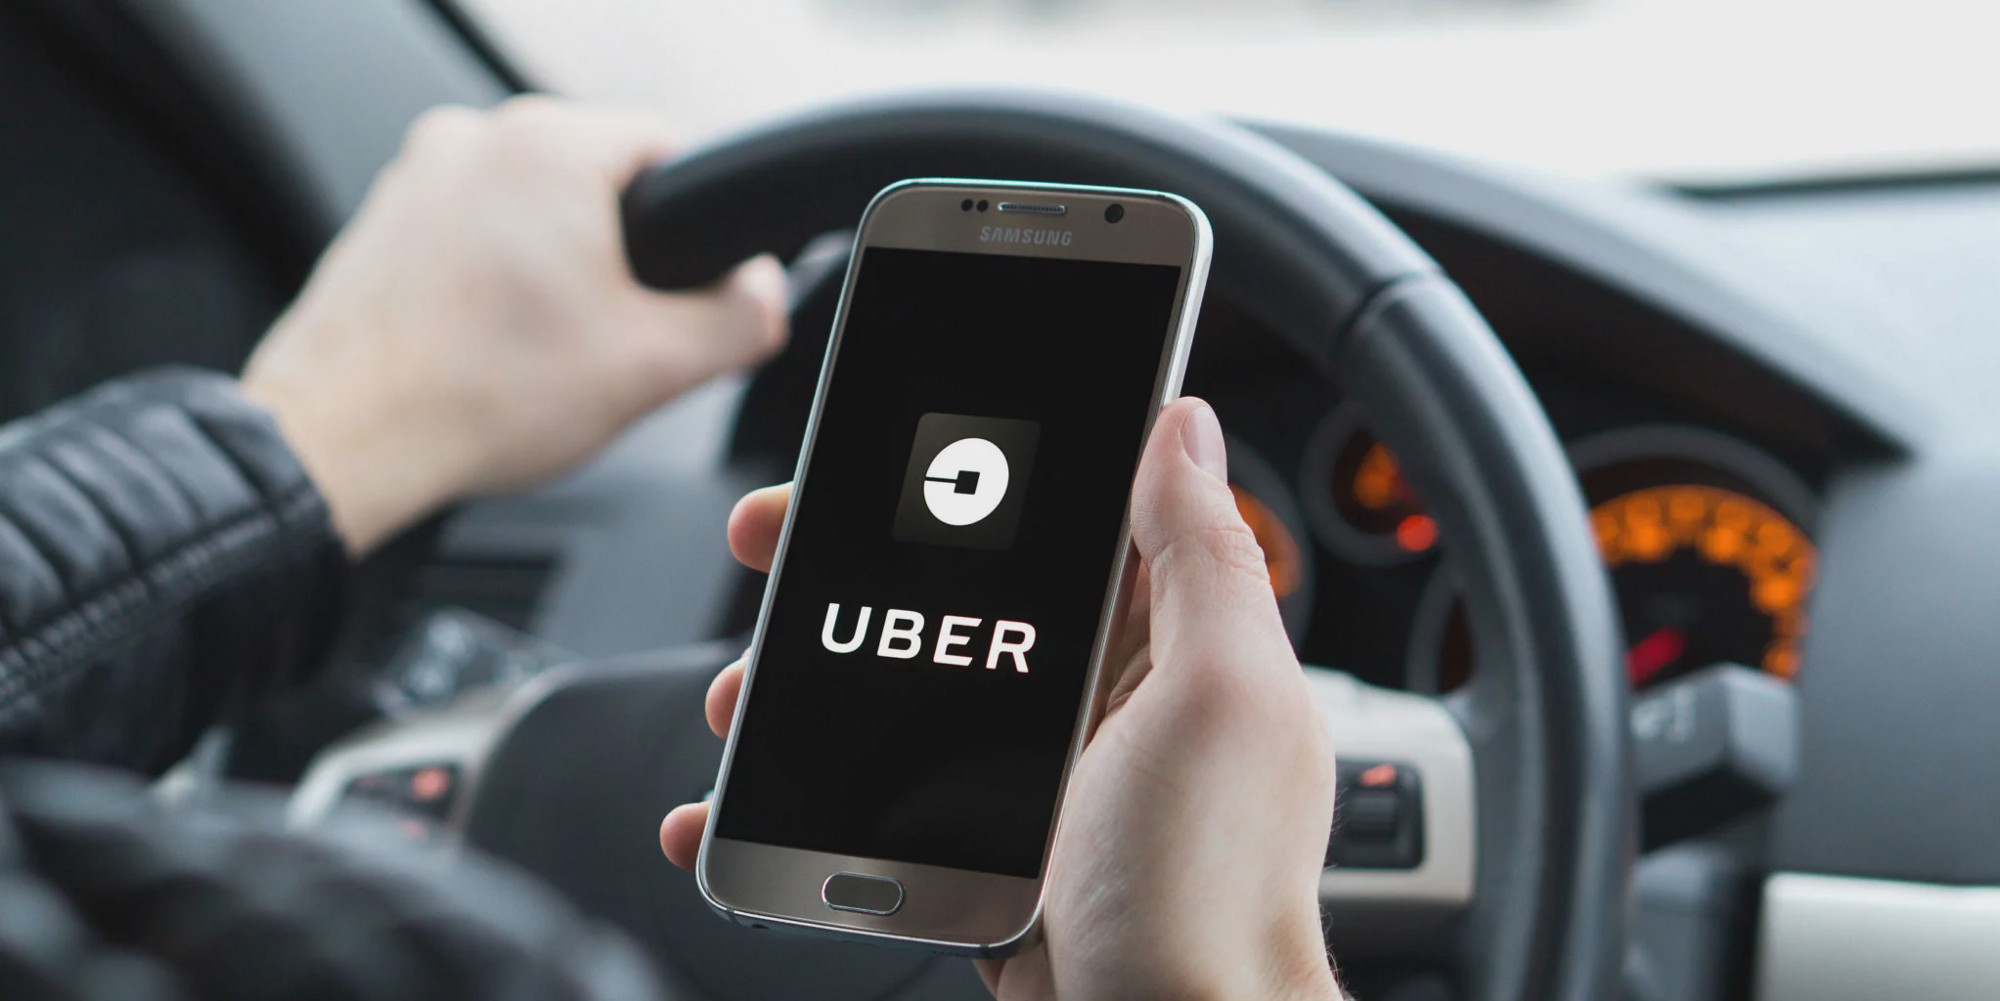 Uber Q1 2019 earning results